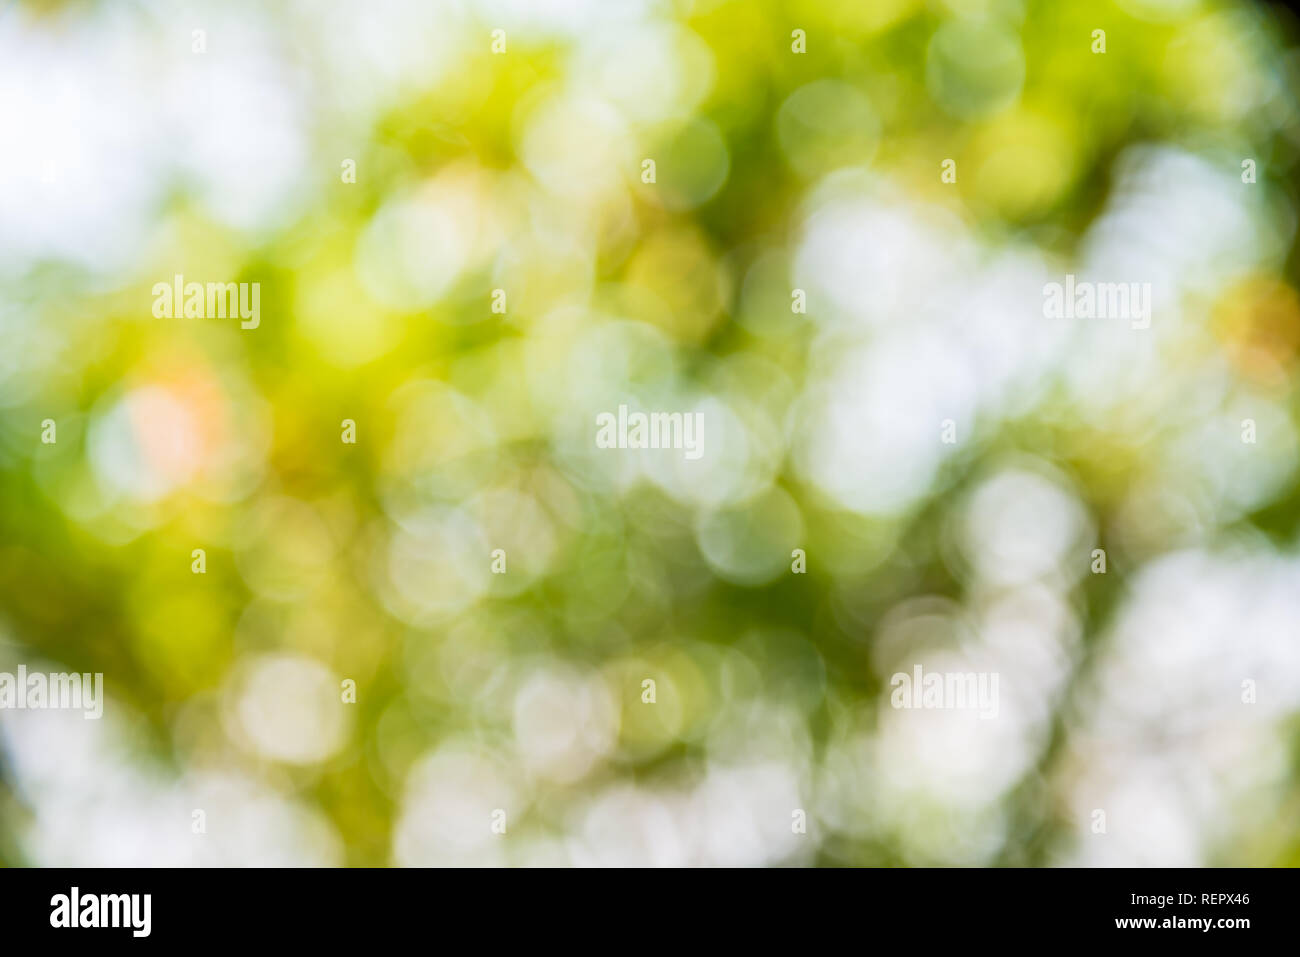 Zoom Shot Out Of Focus Green Tree For Background Bokeh Stock Photo Alamy